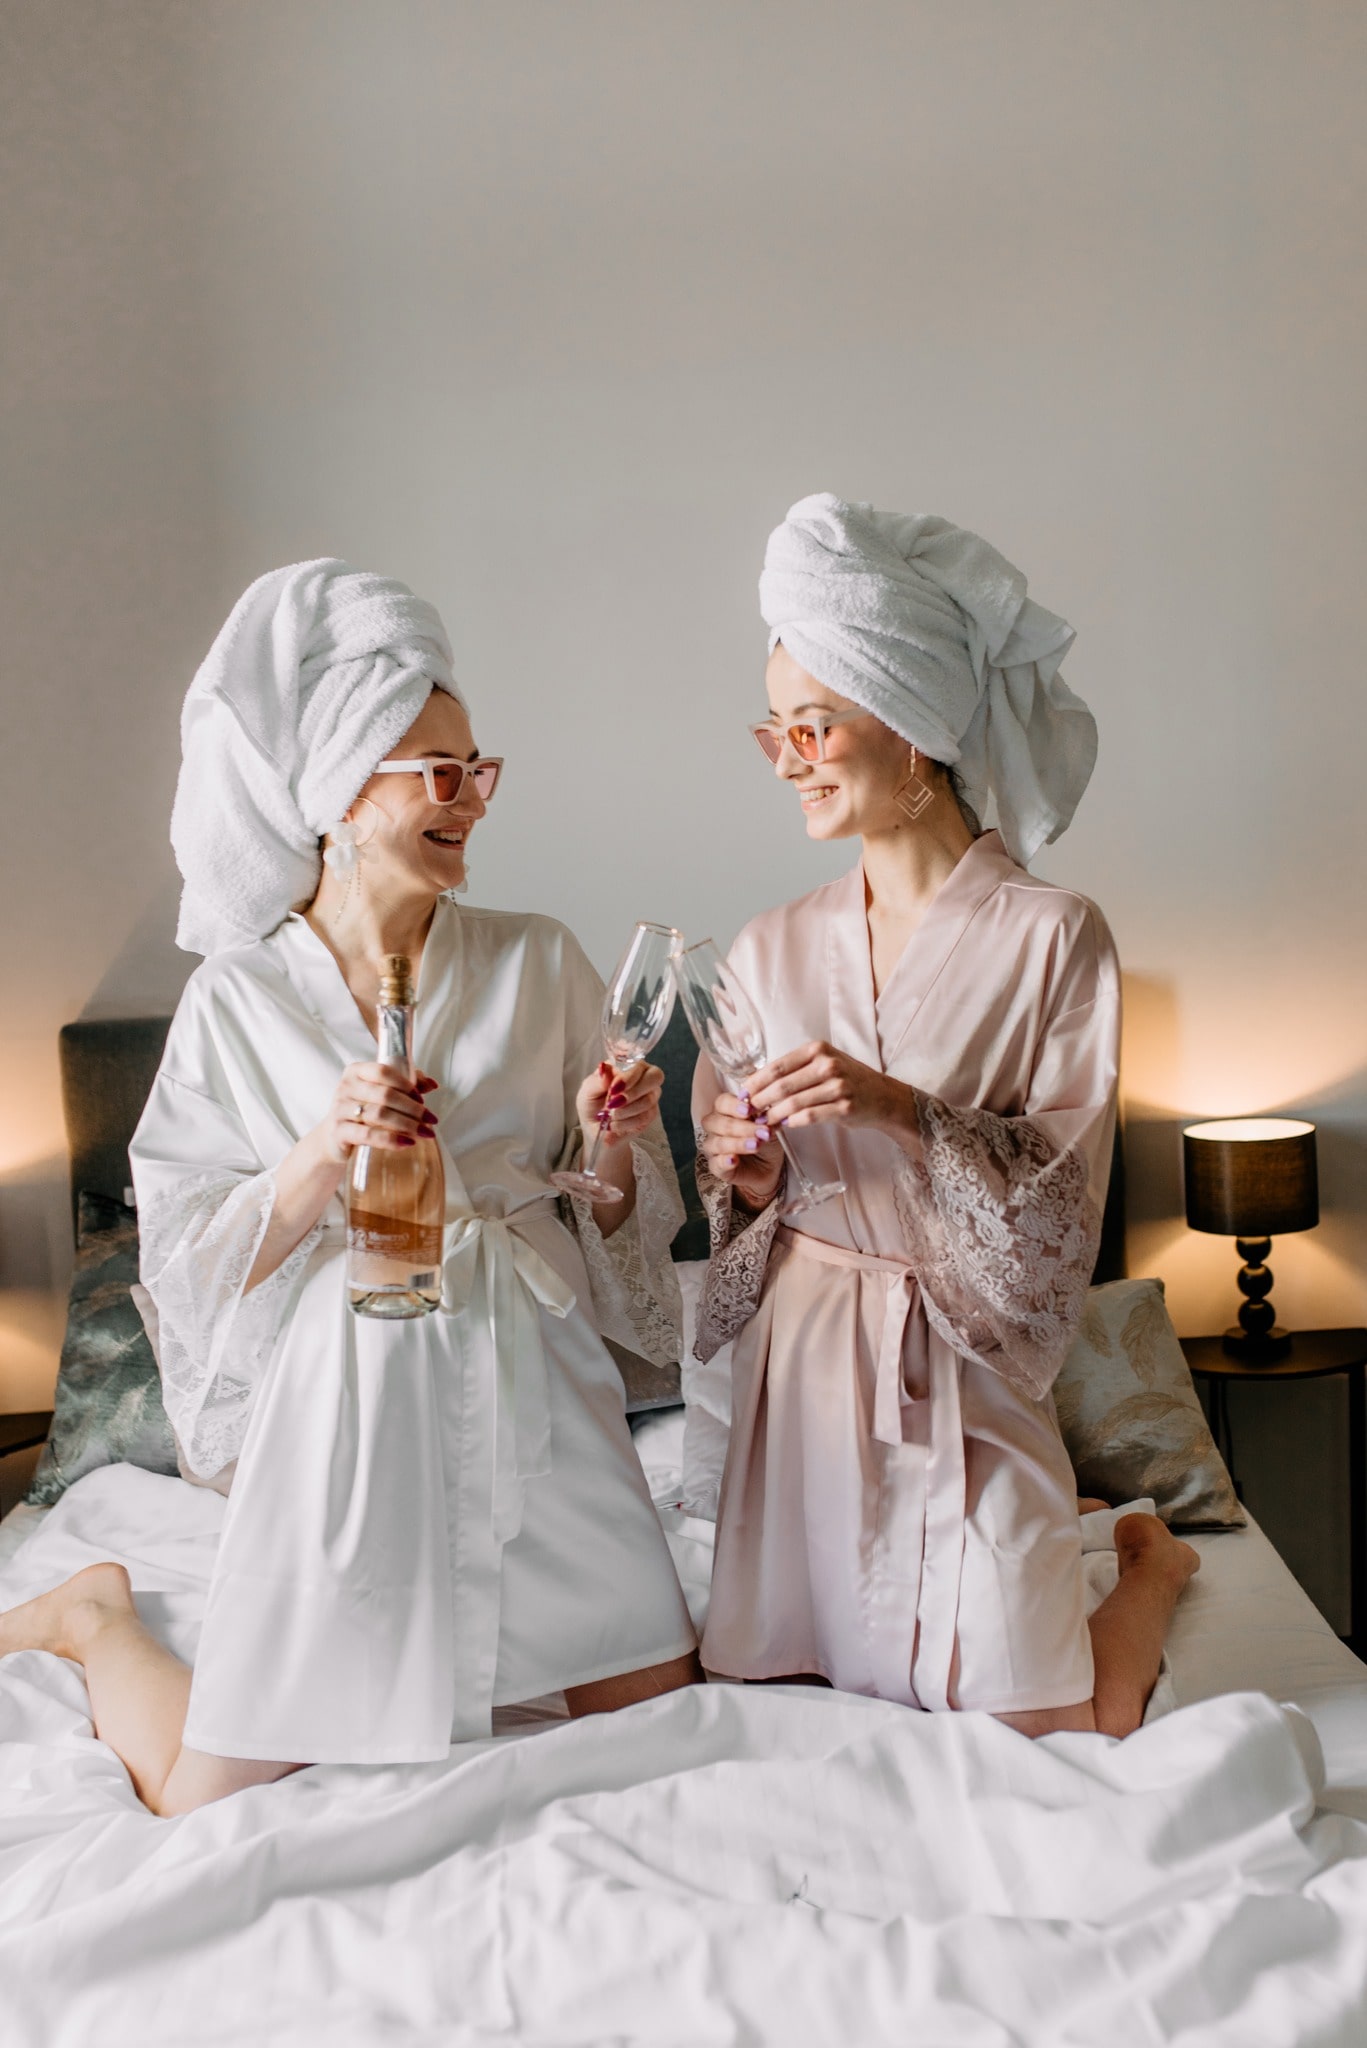 Two women in robes o the hotel bed posing with a prosecco and wine glasses